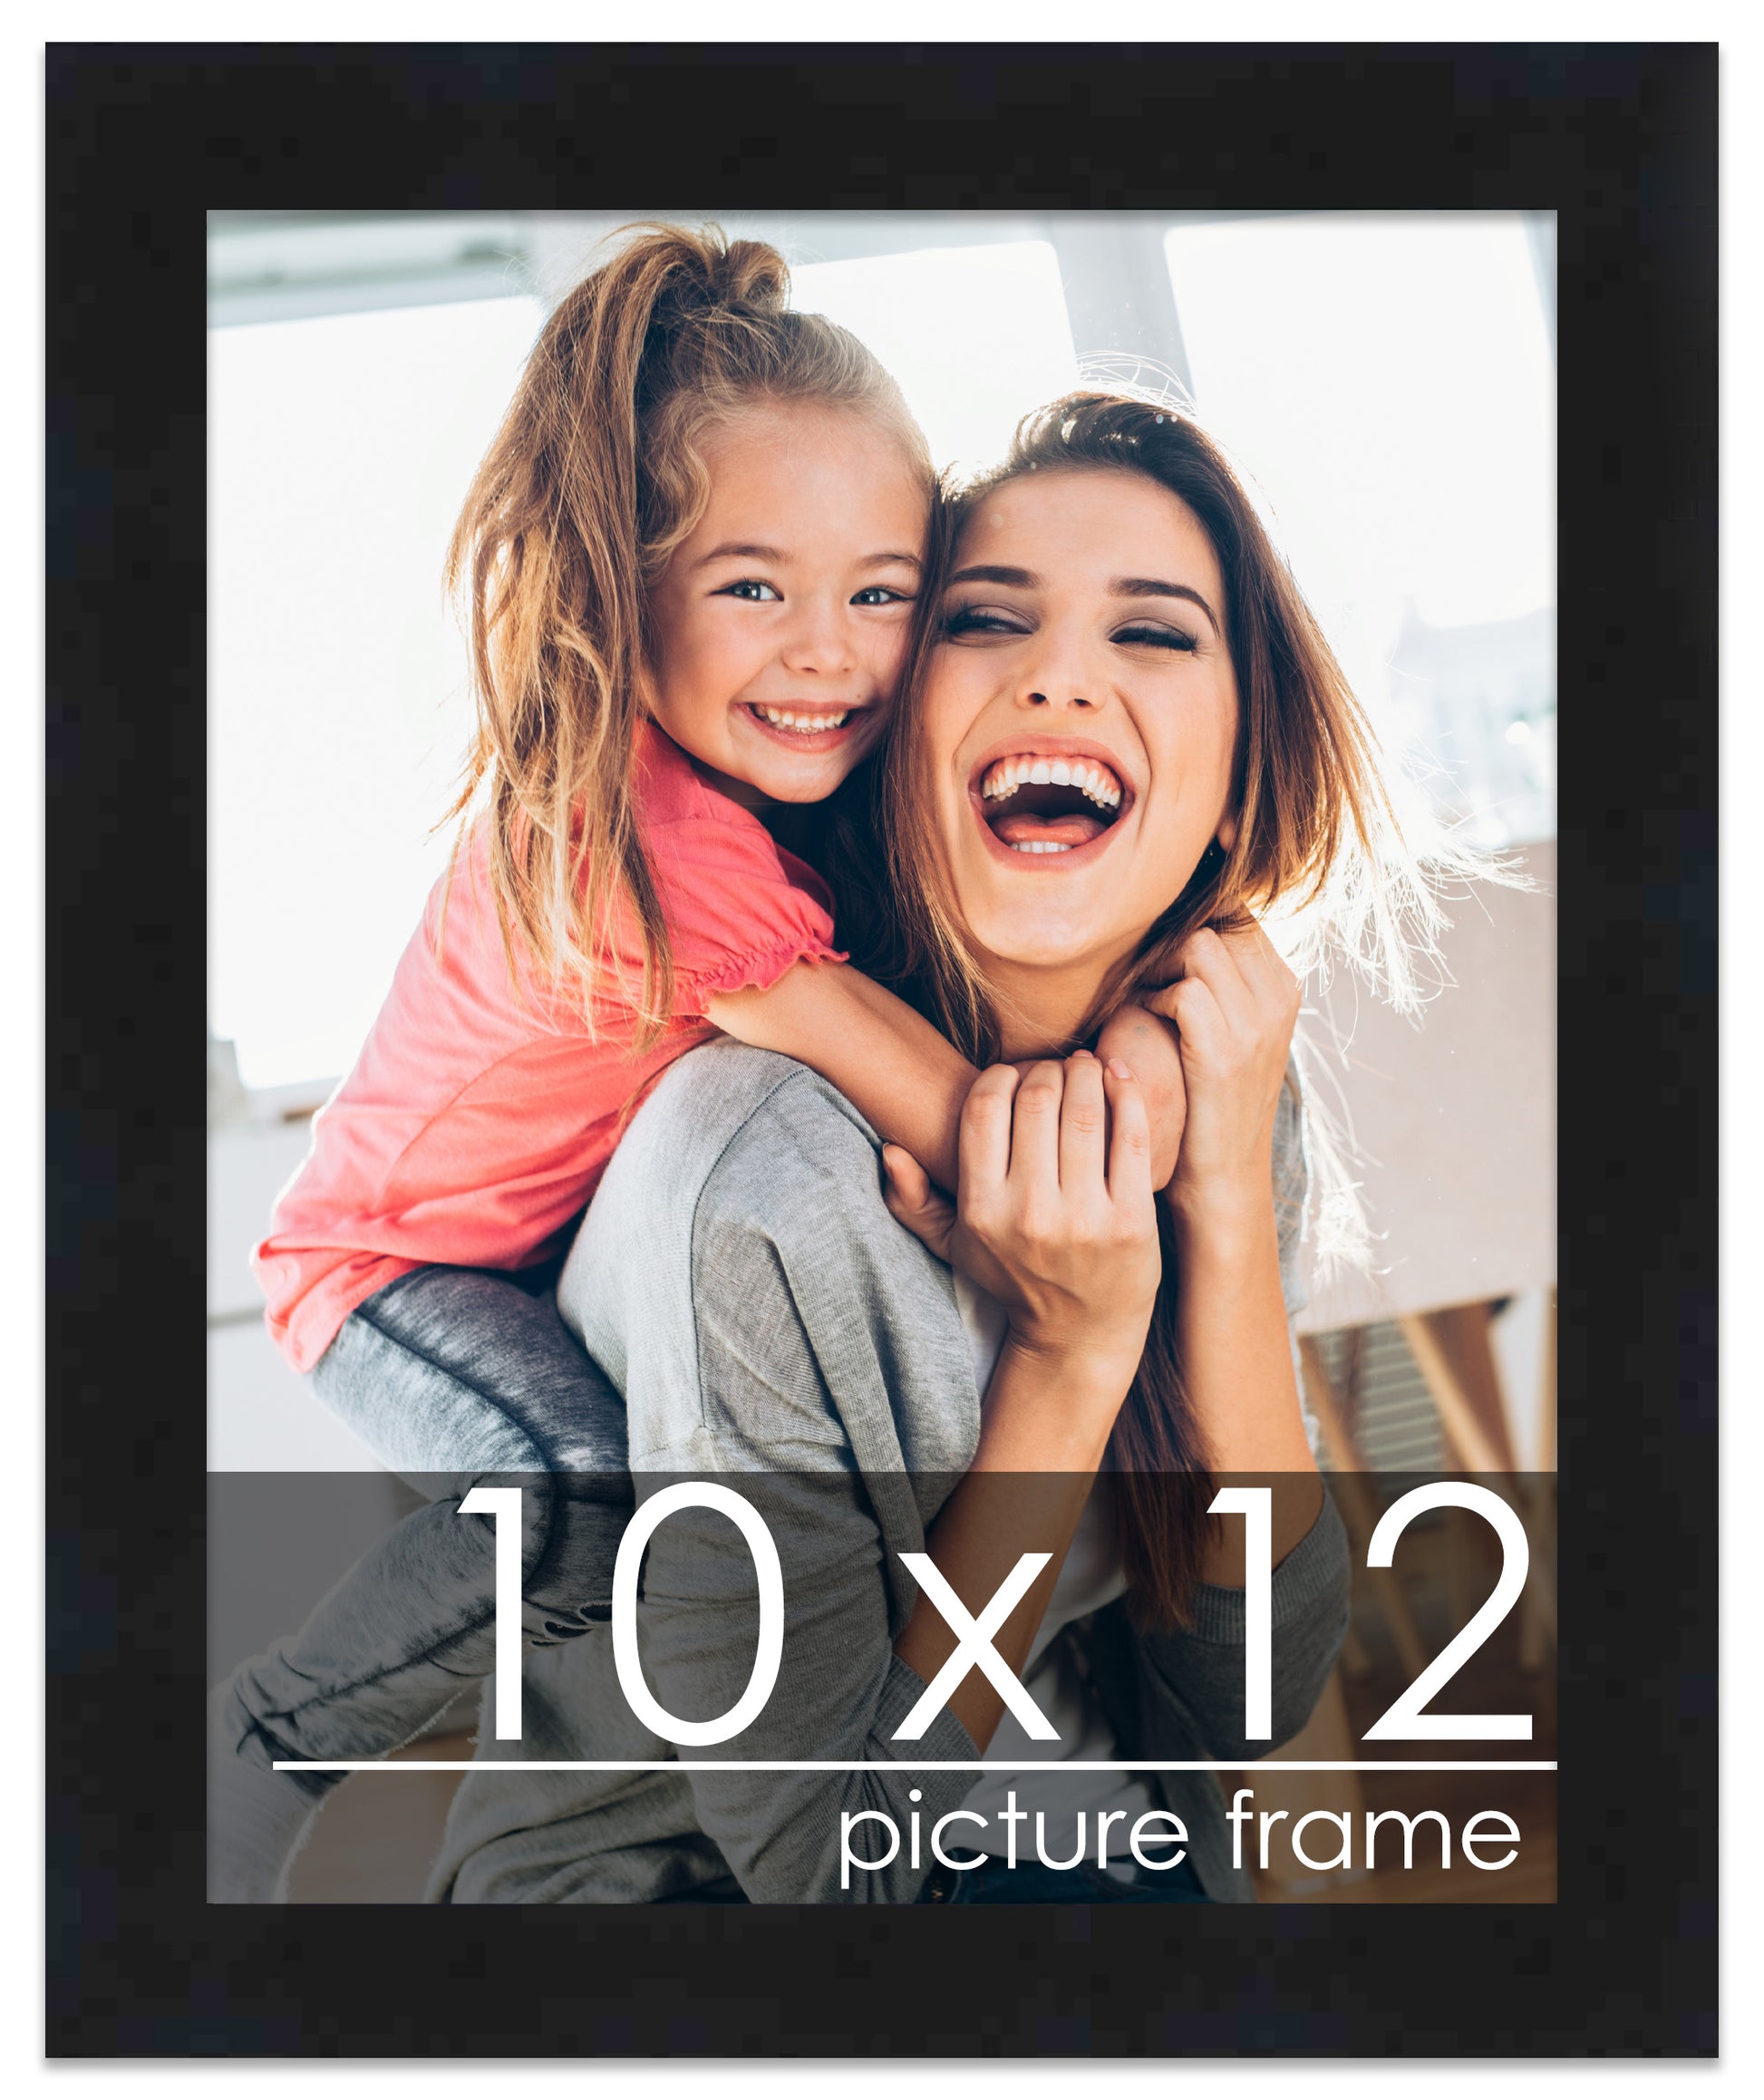 10x12 Picture Frame Black Solid Pine Wood 0.75 Inch Wide